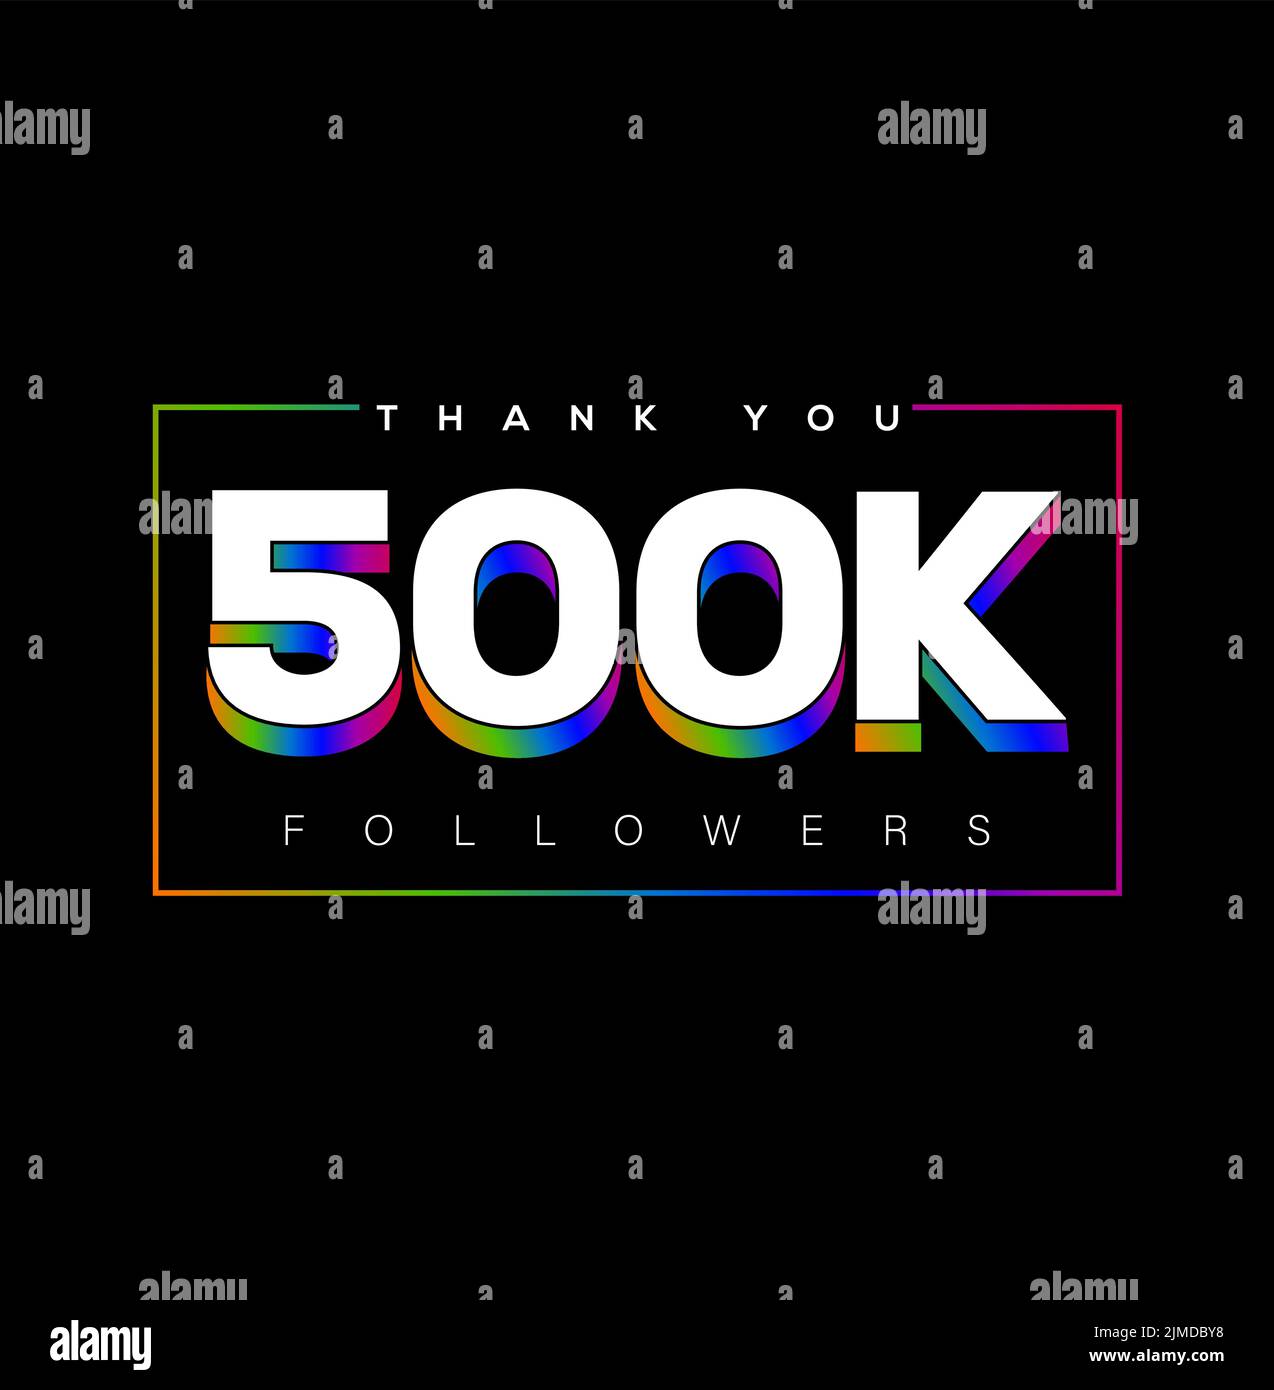 A colorful Thank you 500k followers poster on black background for social media platform Stock Vector